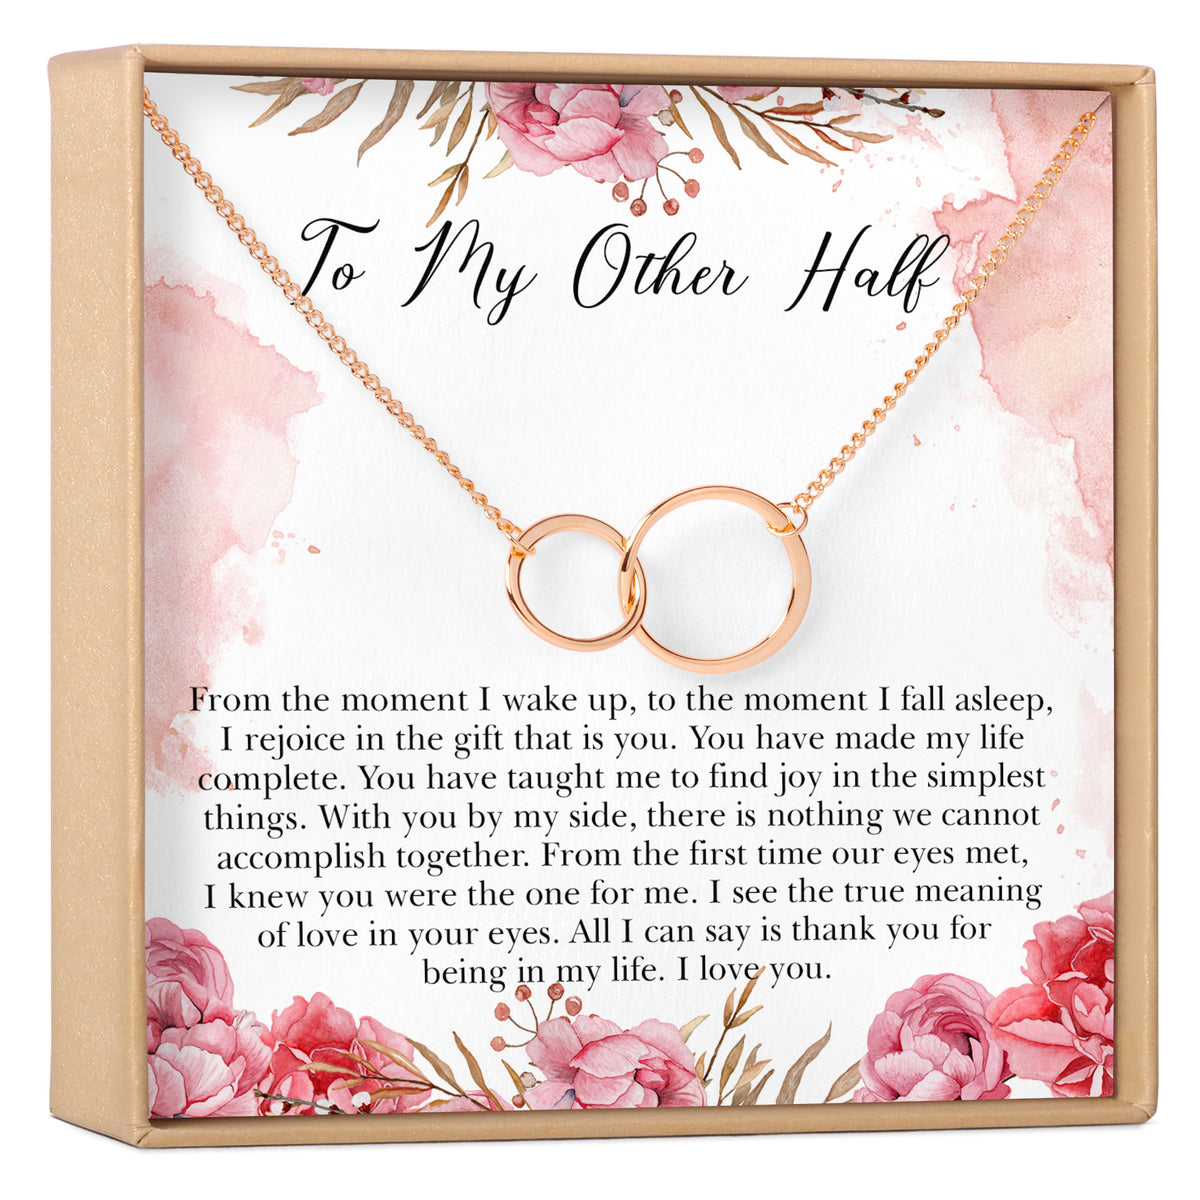 Wife Double Circles Necklace